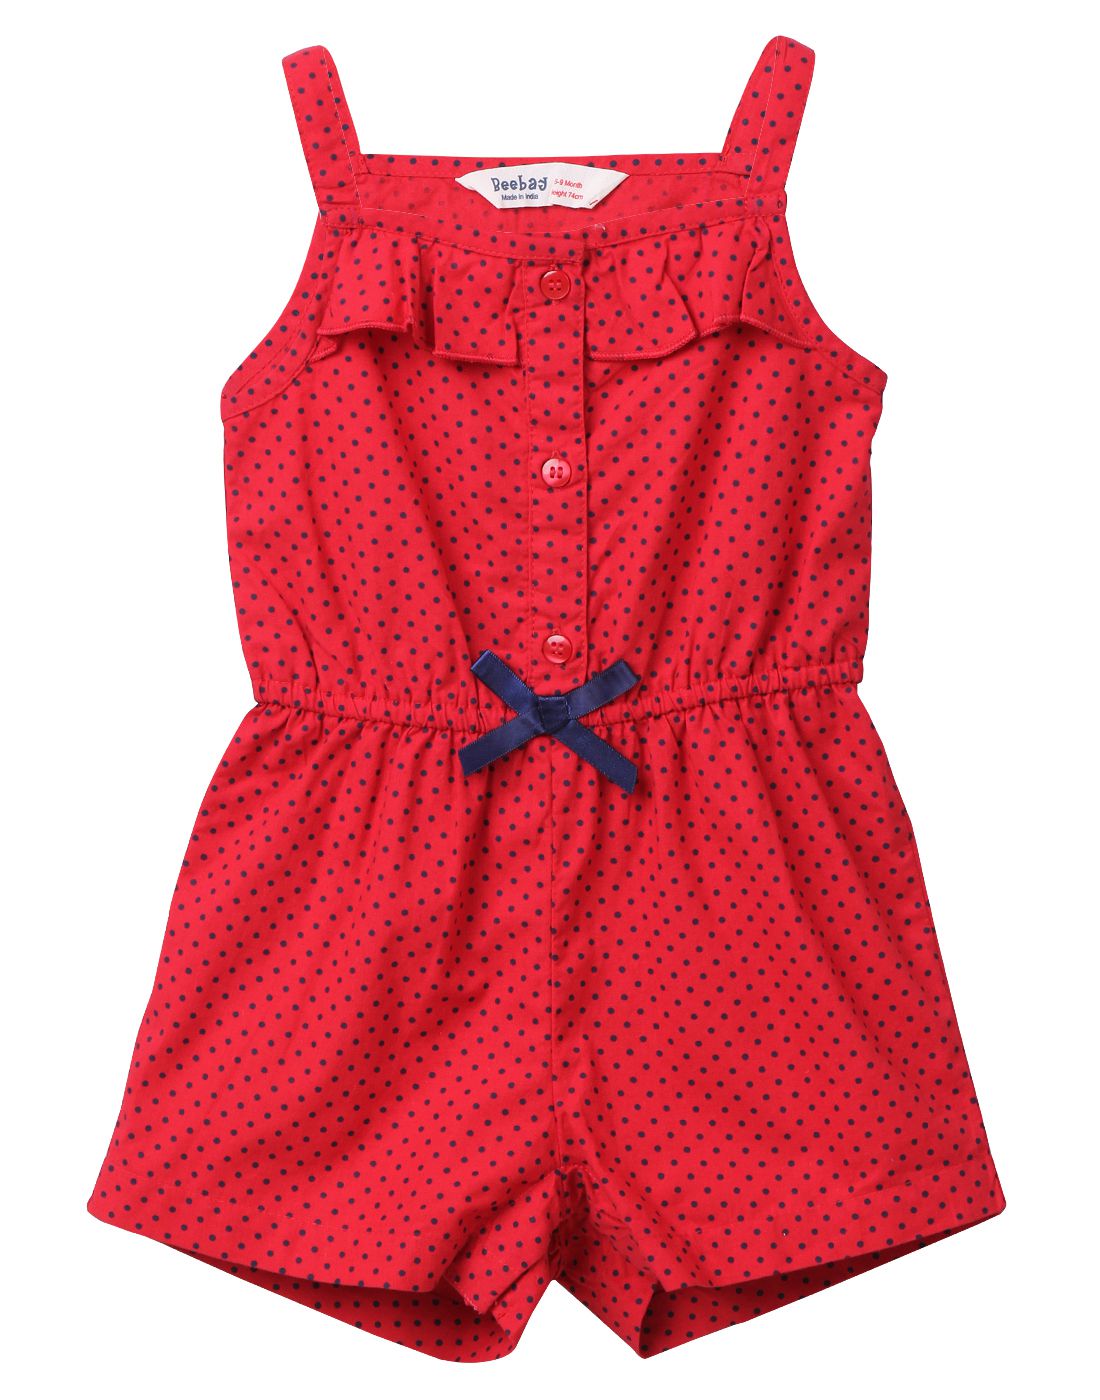 Red Polka Dot Jumpsuit - Buy Red Polka Dot Jumpsuit Online at Low Price ...